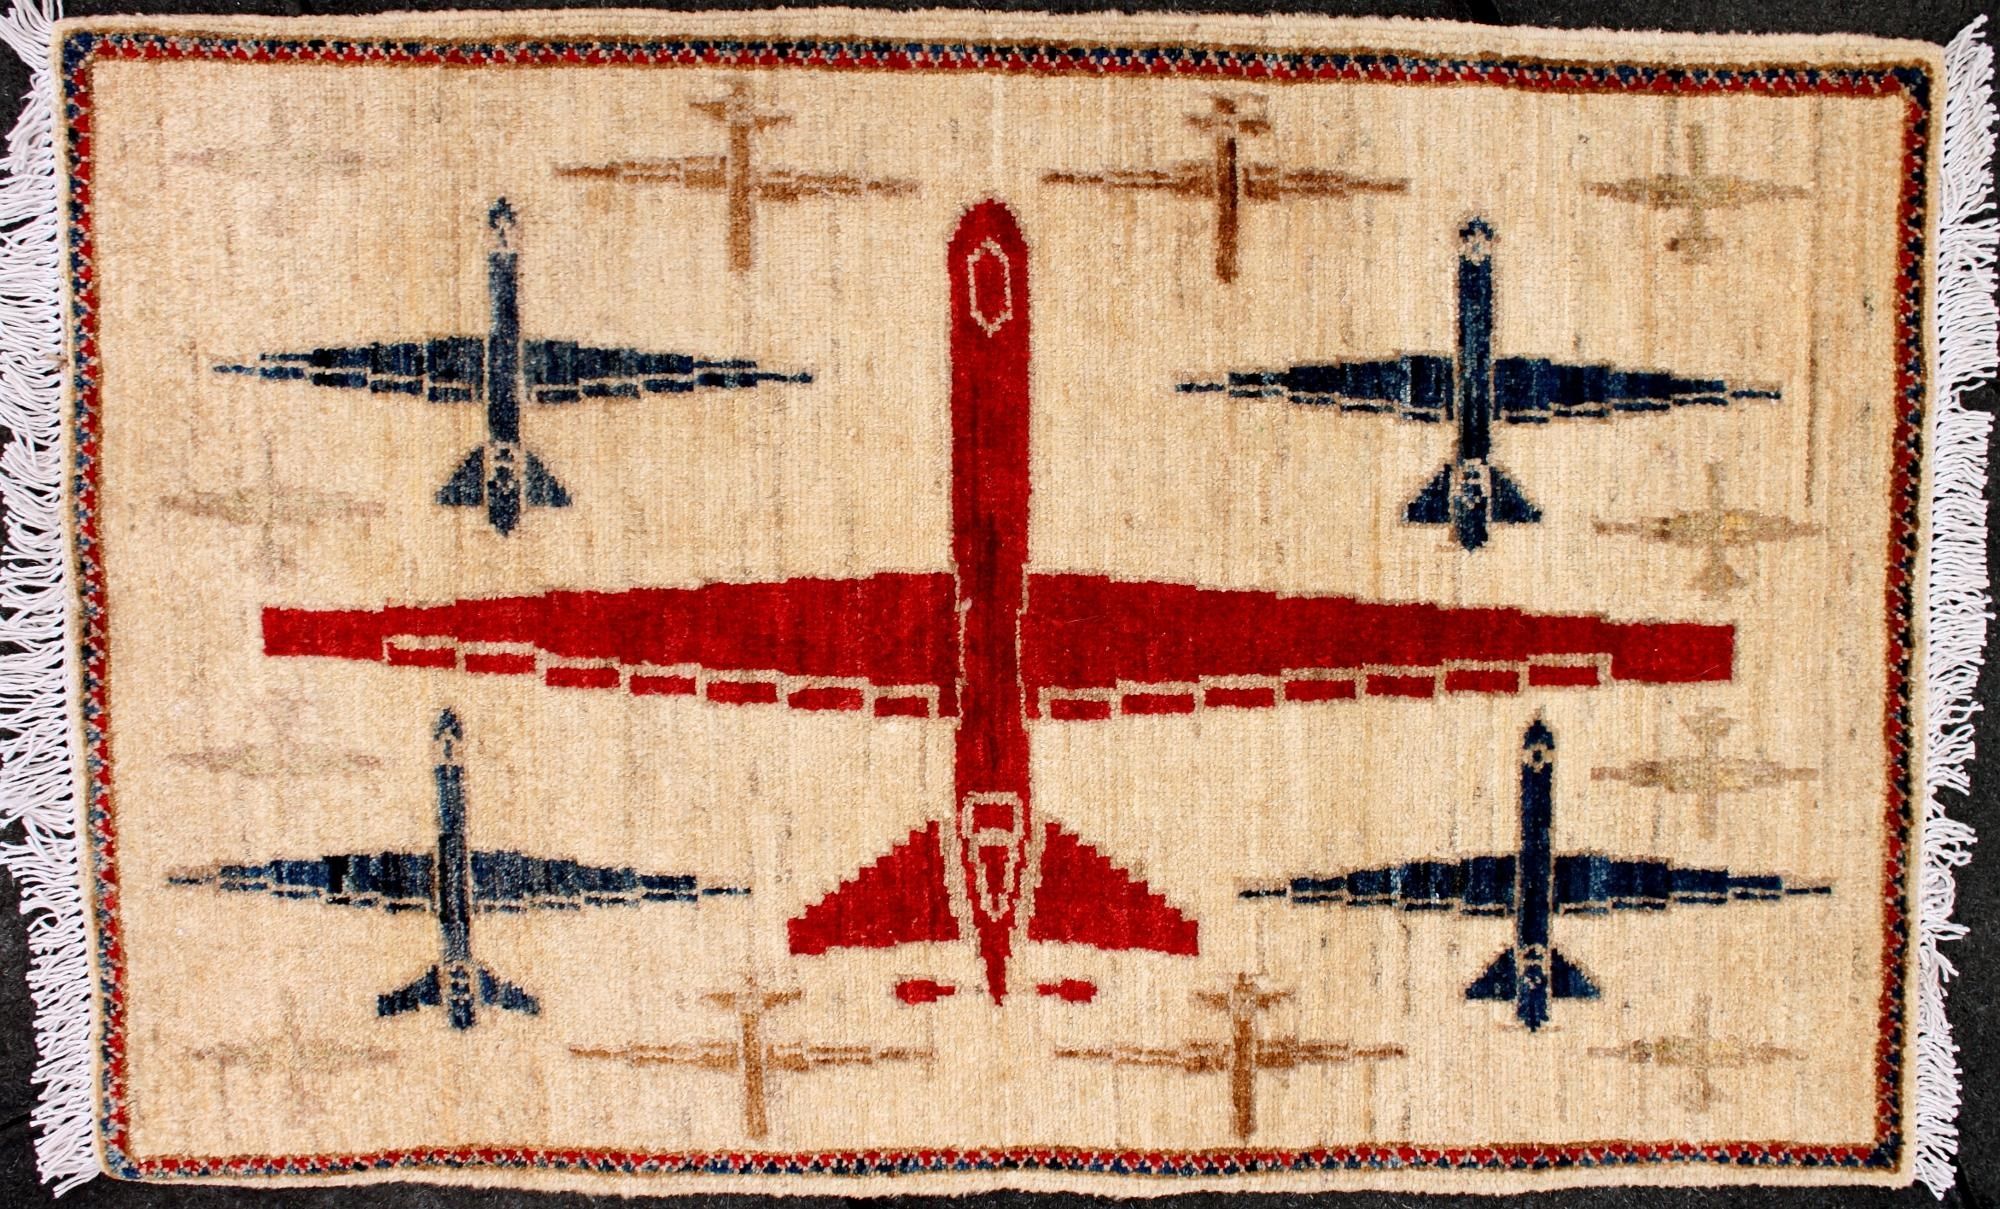 War Rugs Reflect Afghanistans Long History With Conflict Kuow Intended For Afghan Rug Types (View 12 of 15)